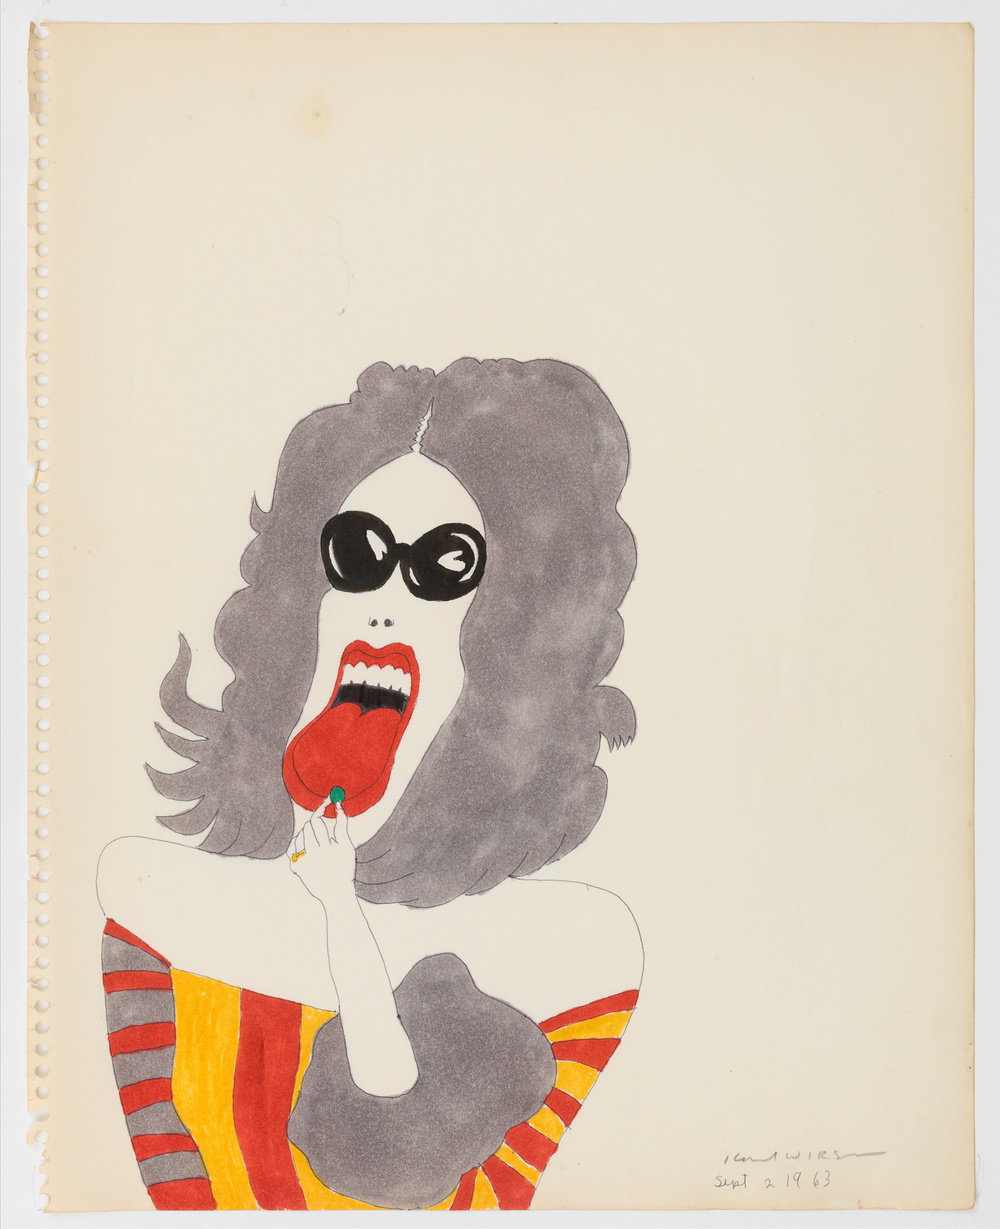 A color ink on paper drawing by Karl Wirsum of a grey-haired figure wearing dark sunglasses and a striped garment.They are sticking their tongue out and placing a small, round, green object onto it. 